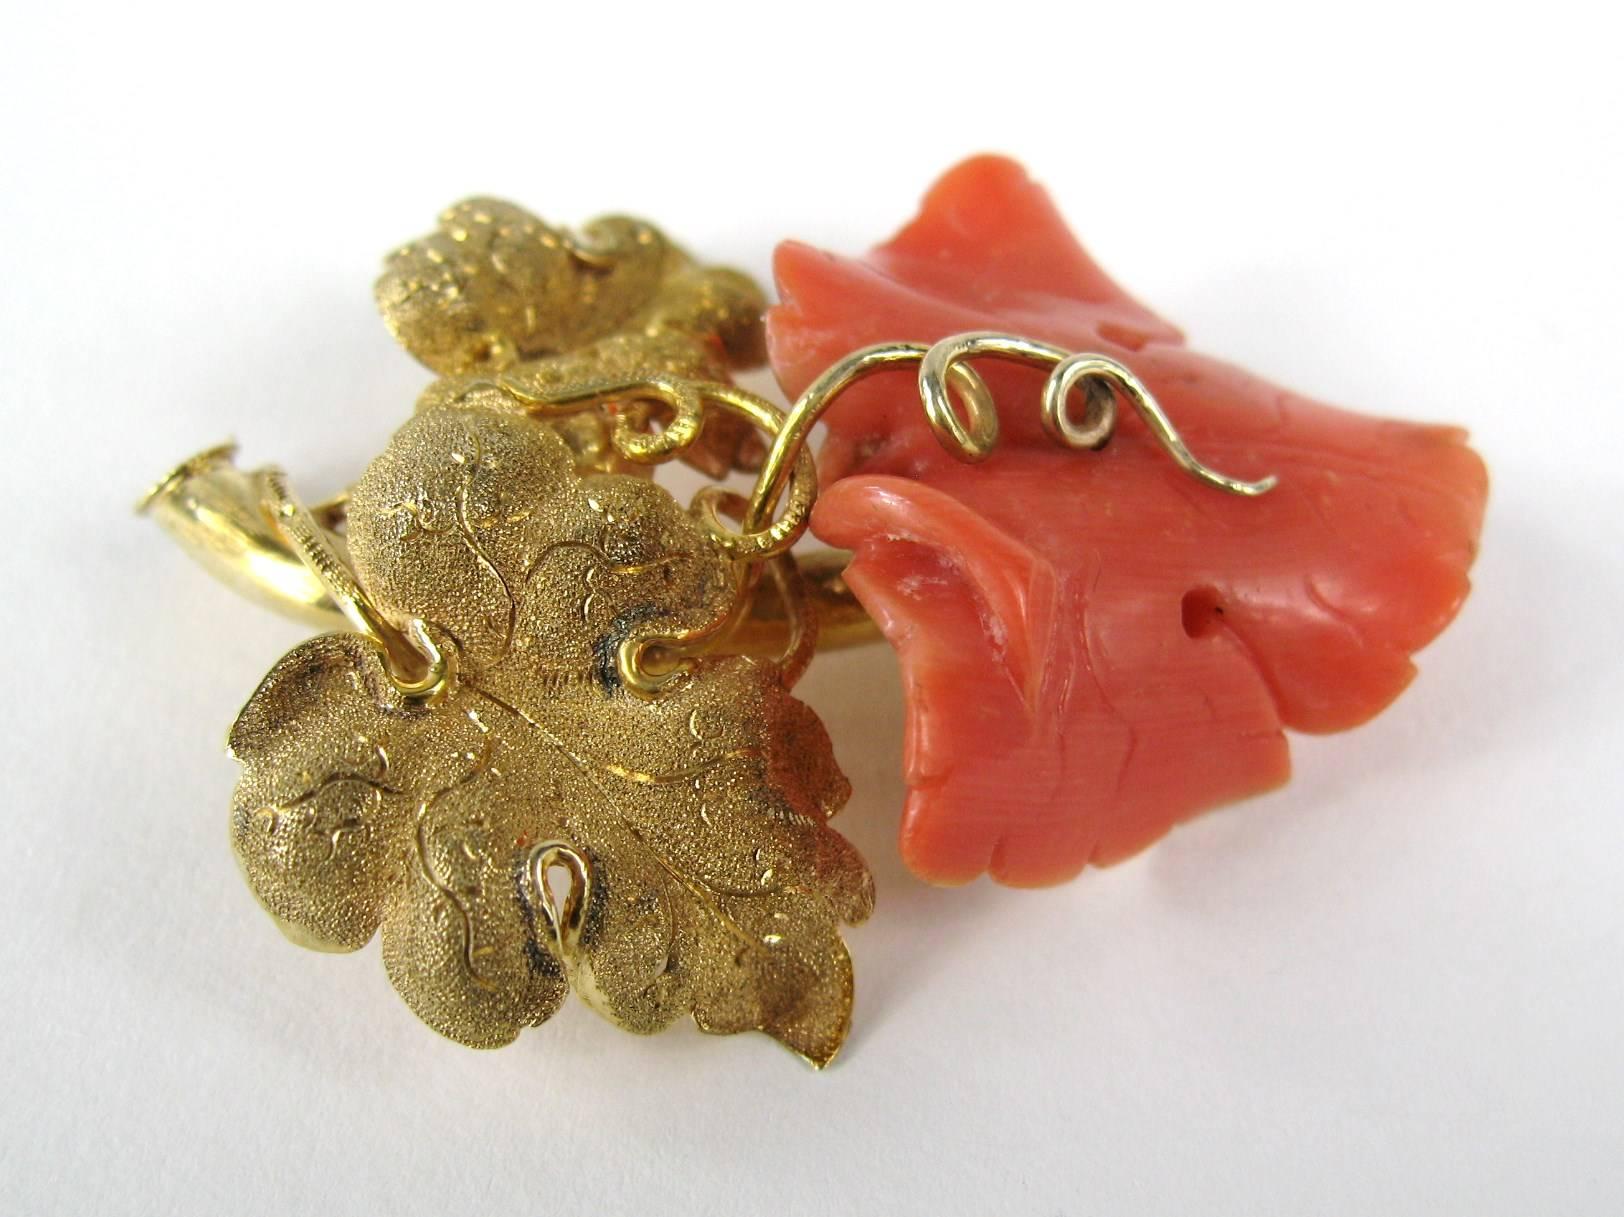 Stunning Early Carved Coral Flower, Can be worn on a variety of chains. Measures 1.88 in x 1.46 in, Set in 14K Gold. Be sure to check our store front for more fabulous pieces from this collection. We have been selling this collection on 1st dibs